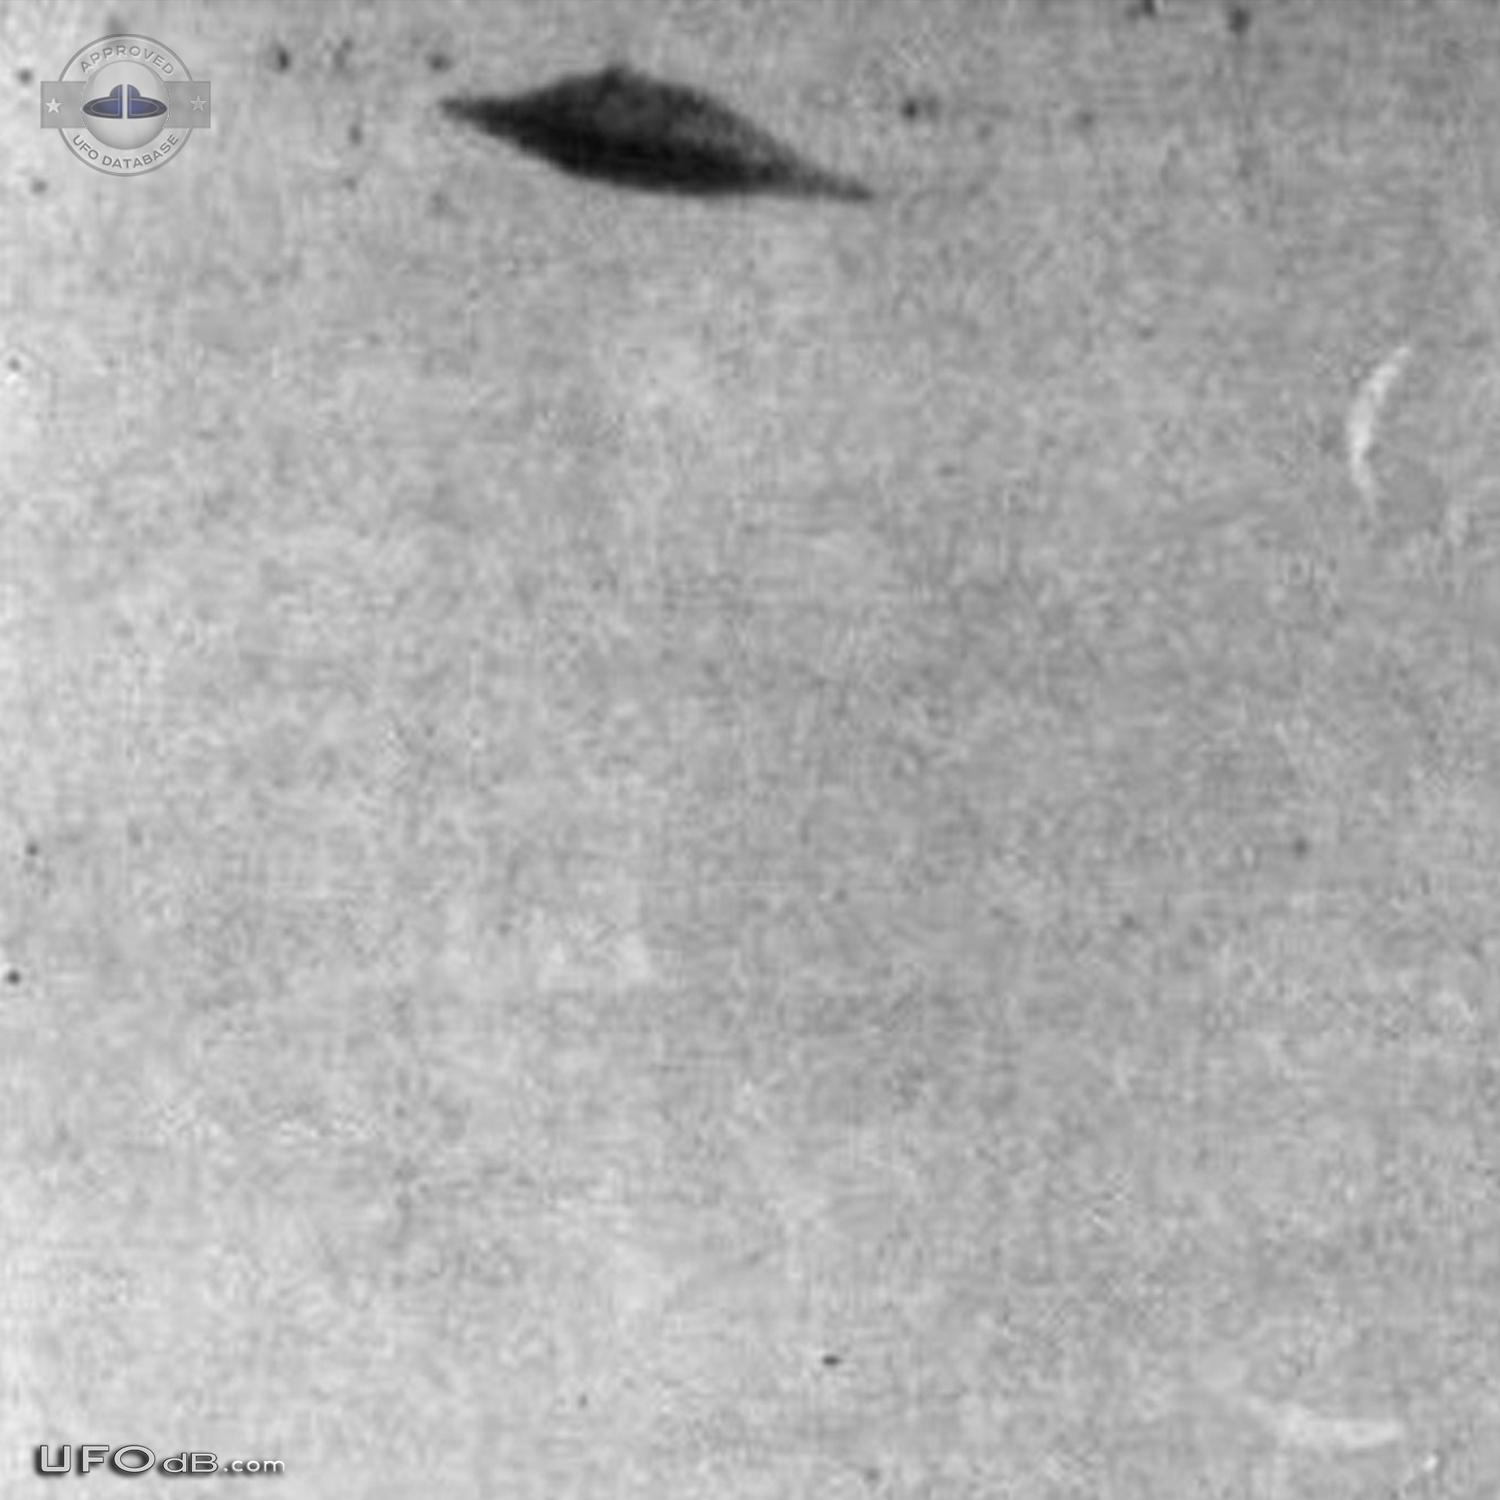 Old 1978 double Saucer UFO picture from Renalegh, Buenos Aires UFO Picture #491-2